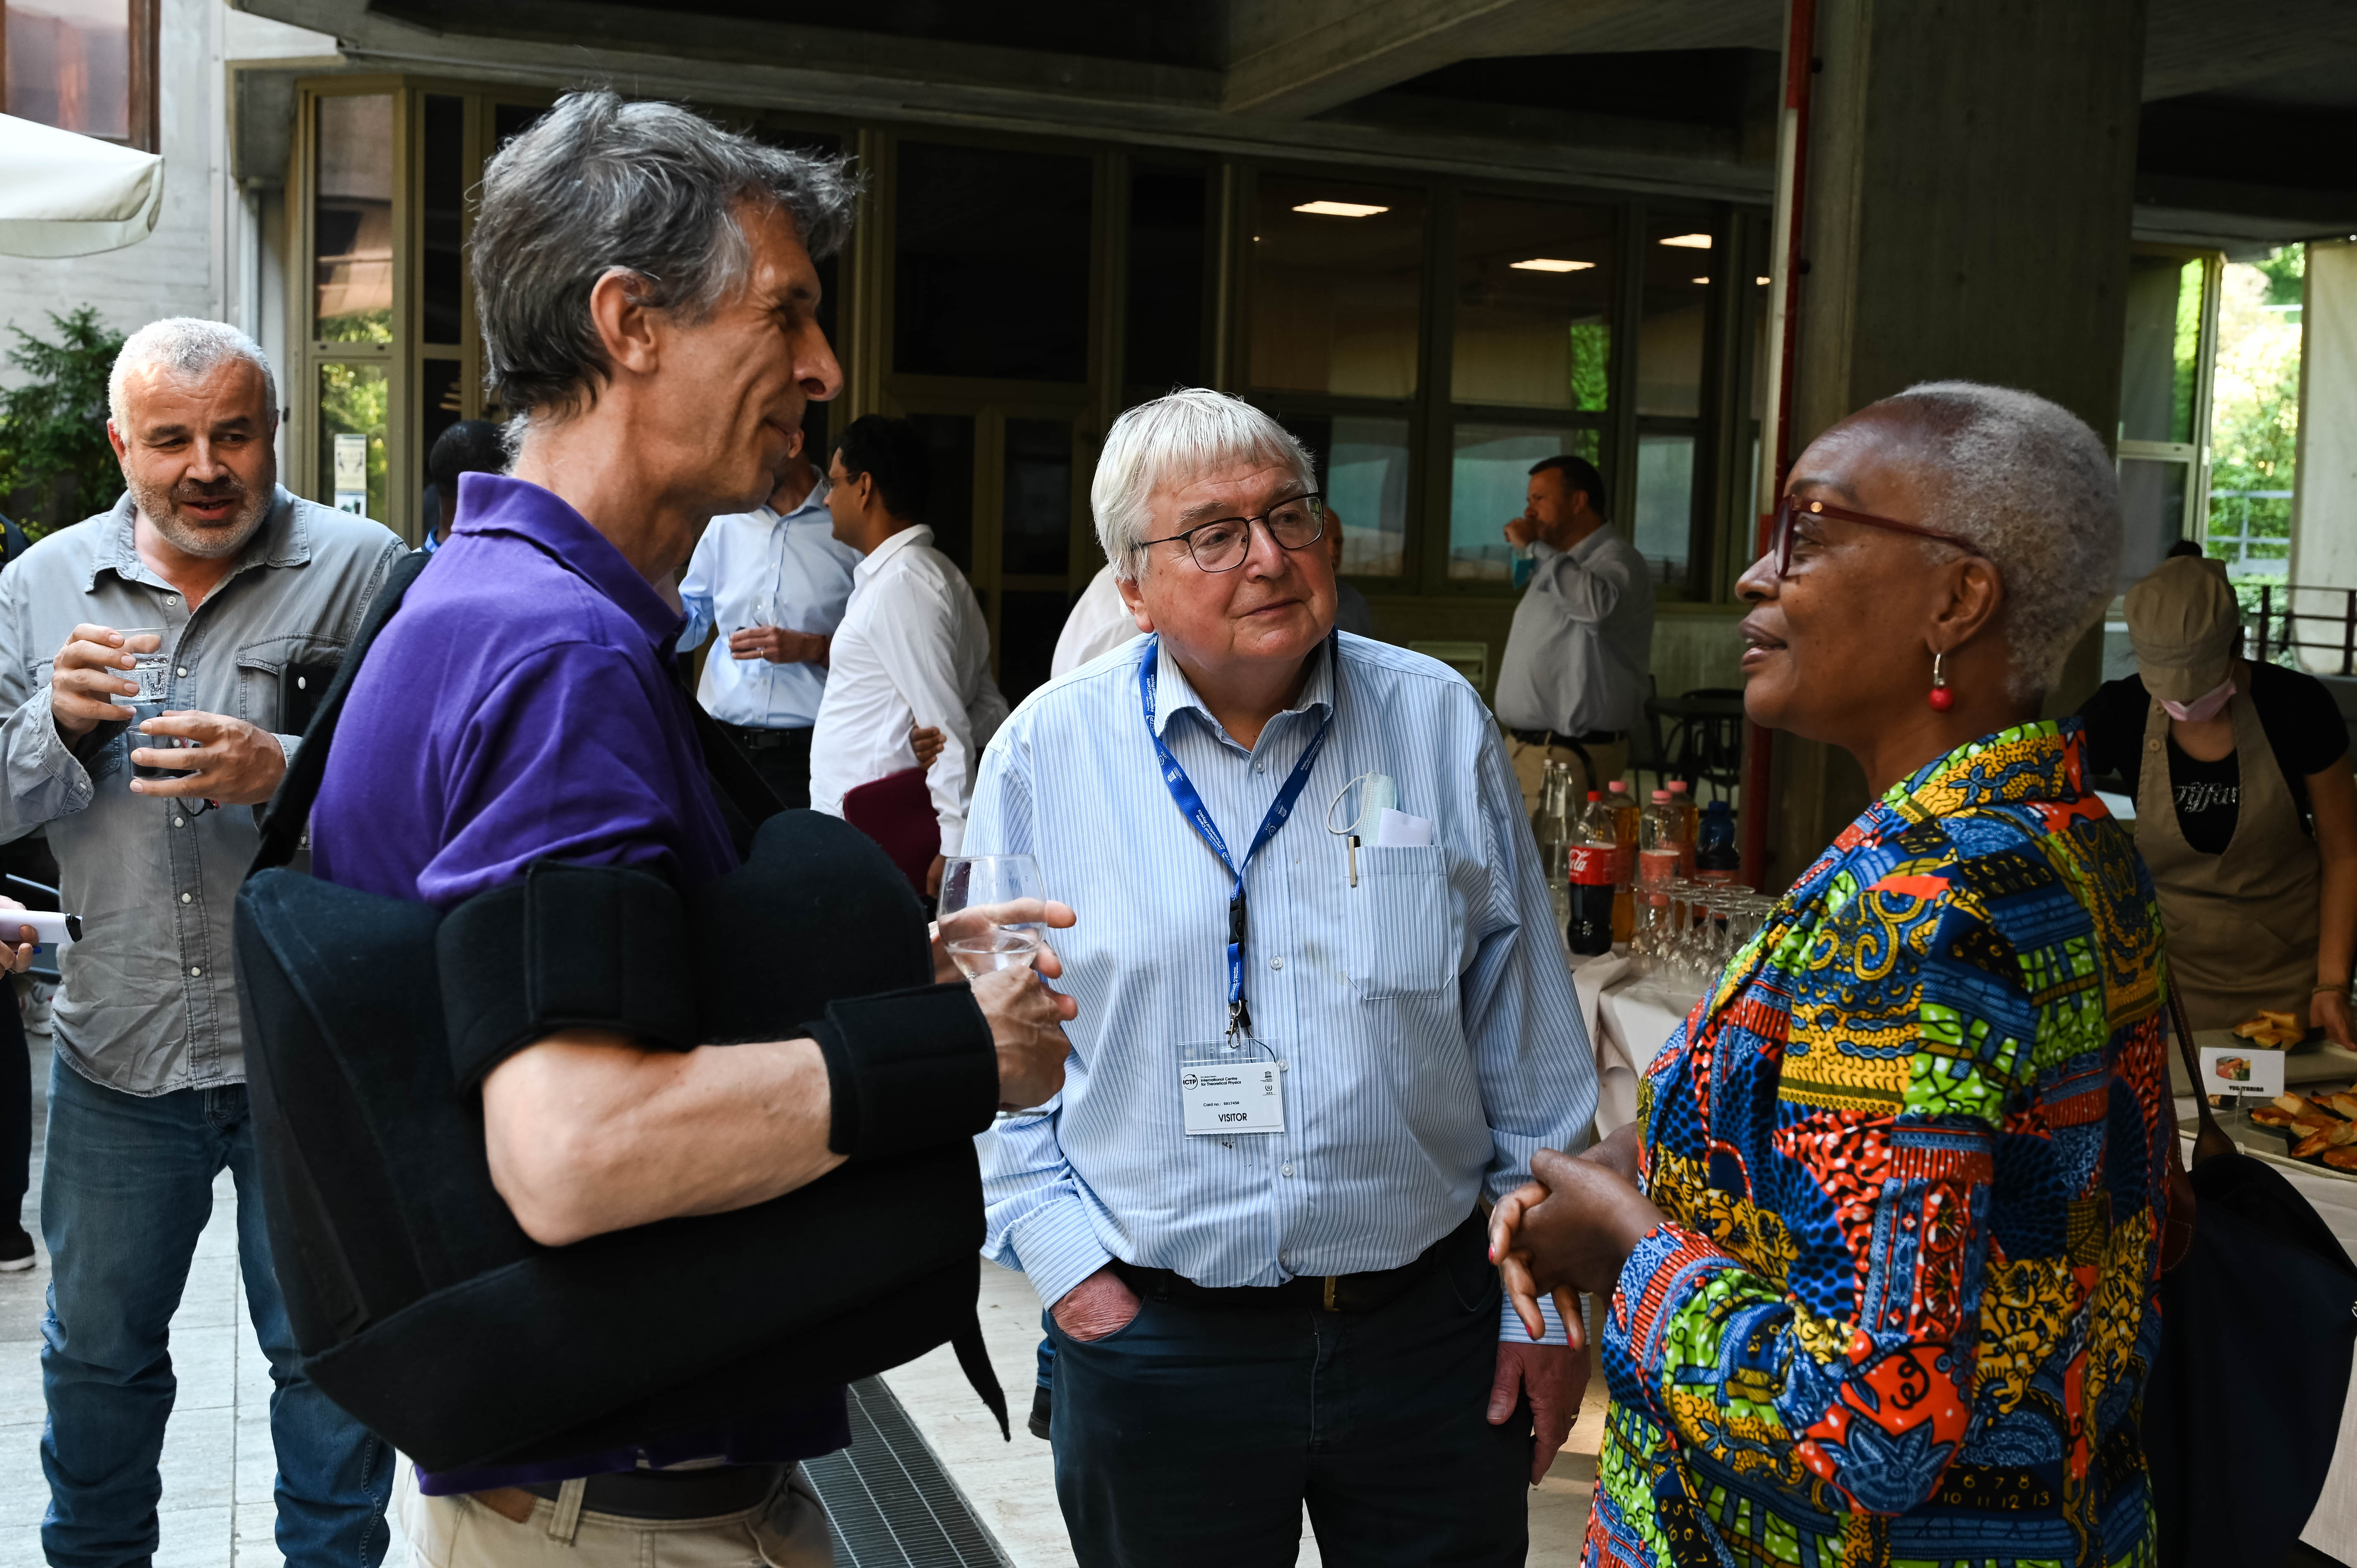 Richard Catlow talking to some of the members of the IAP Trieste Secretariat 